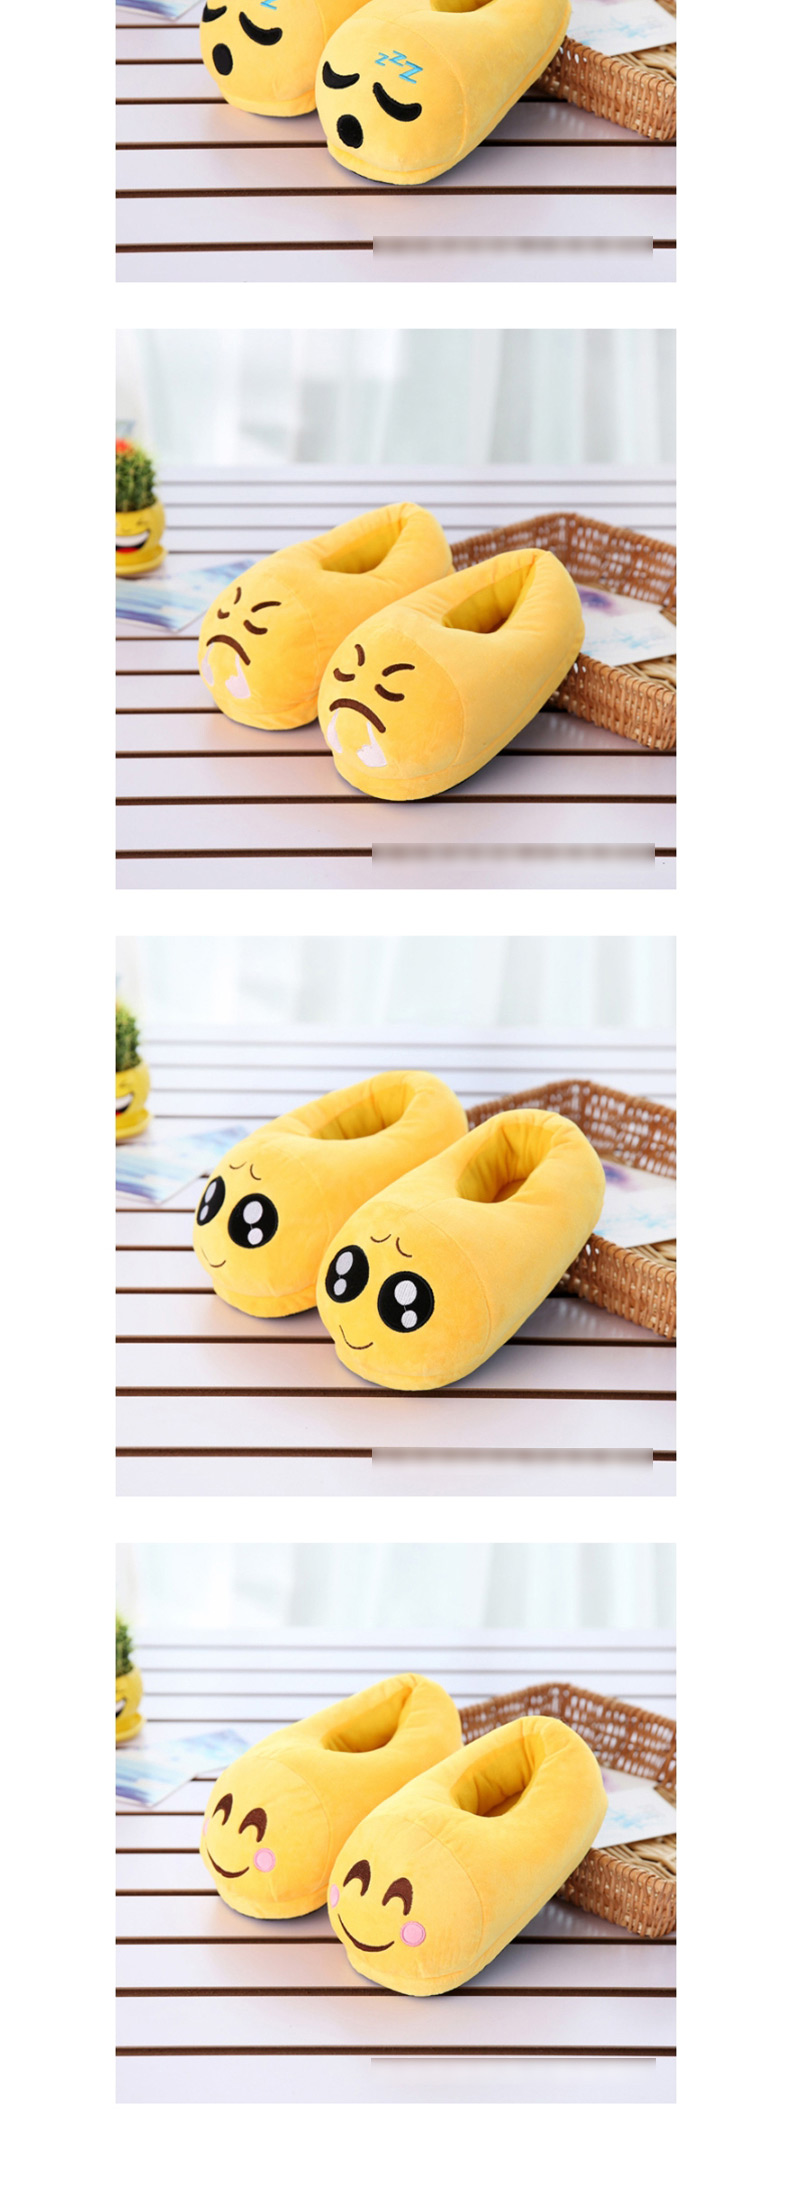 Fashion 4 Yellow Tongue Cartoon Expression Plush Bag With Cotton Slippers,Slippers